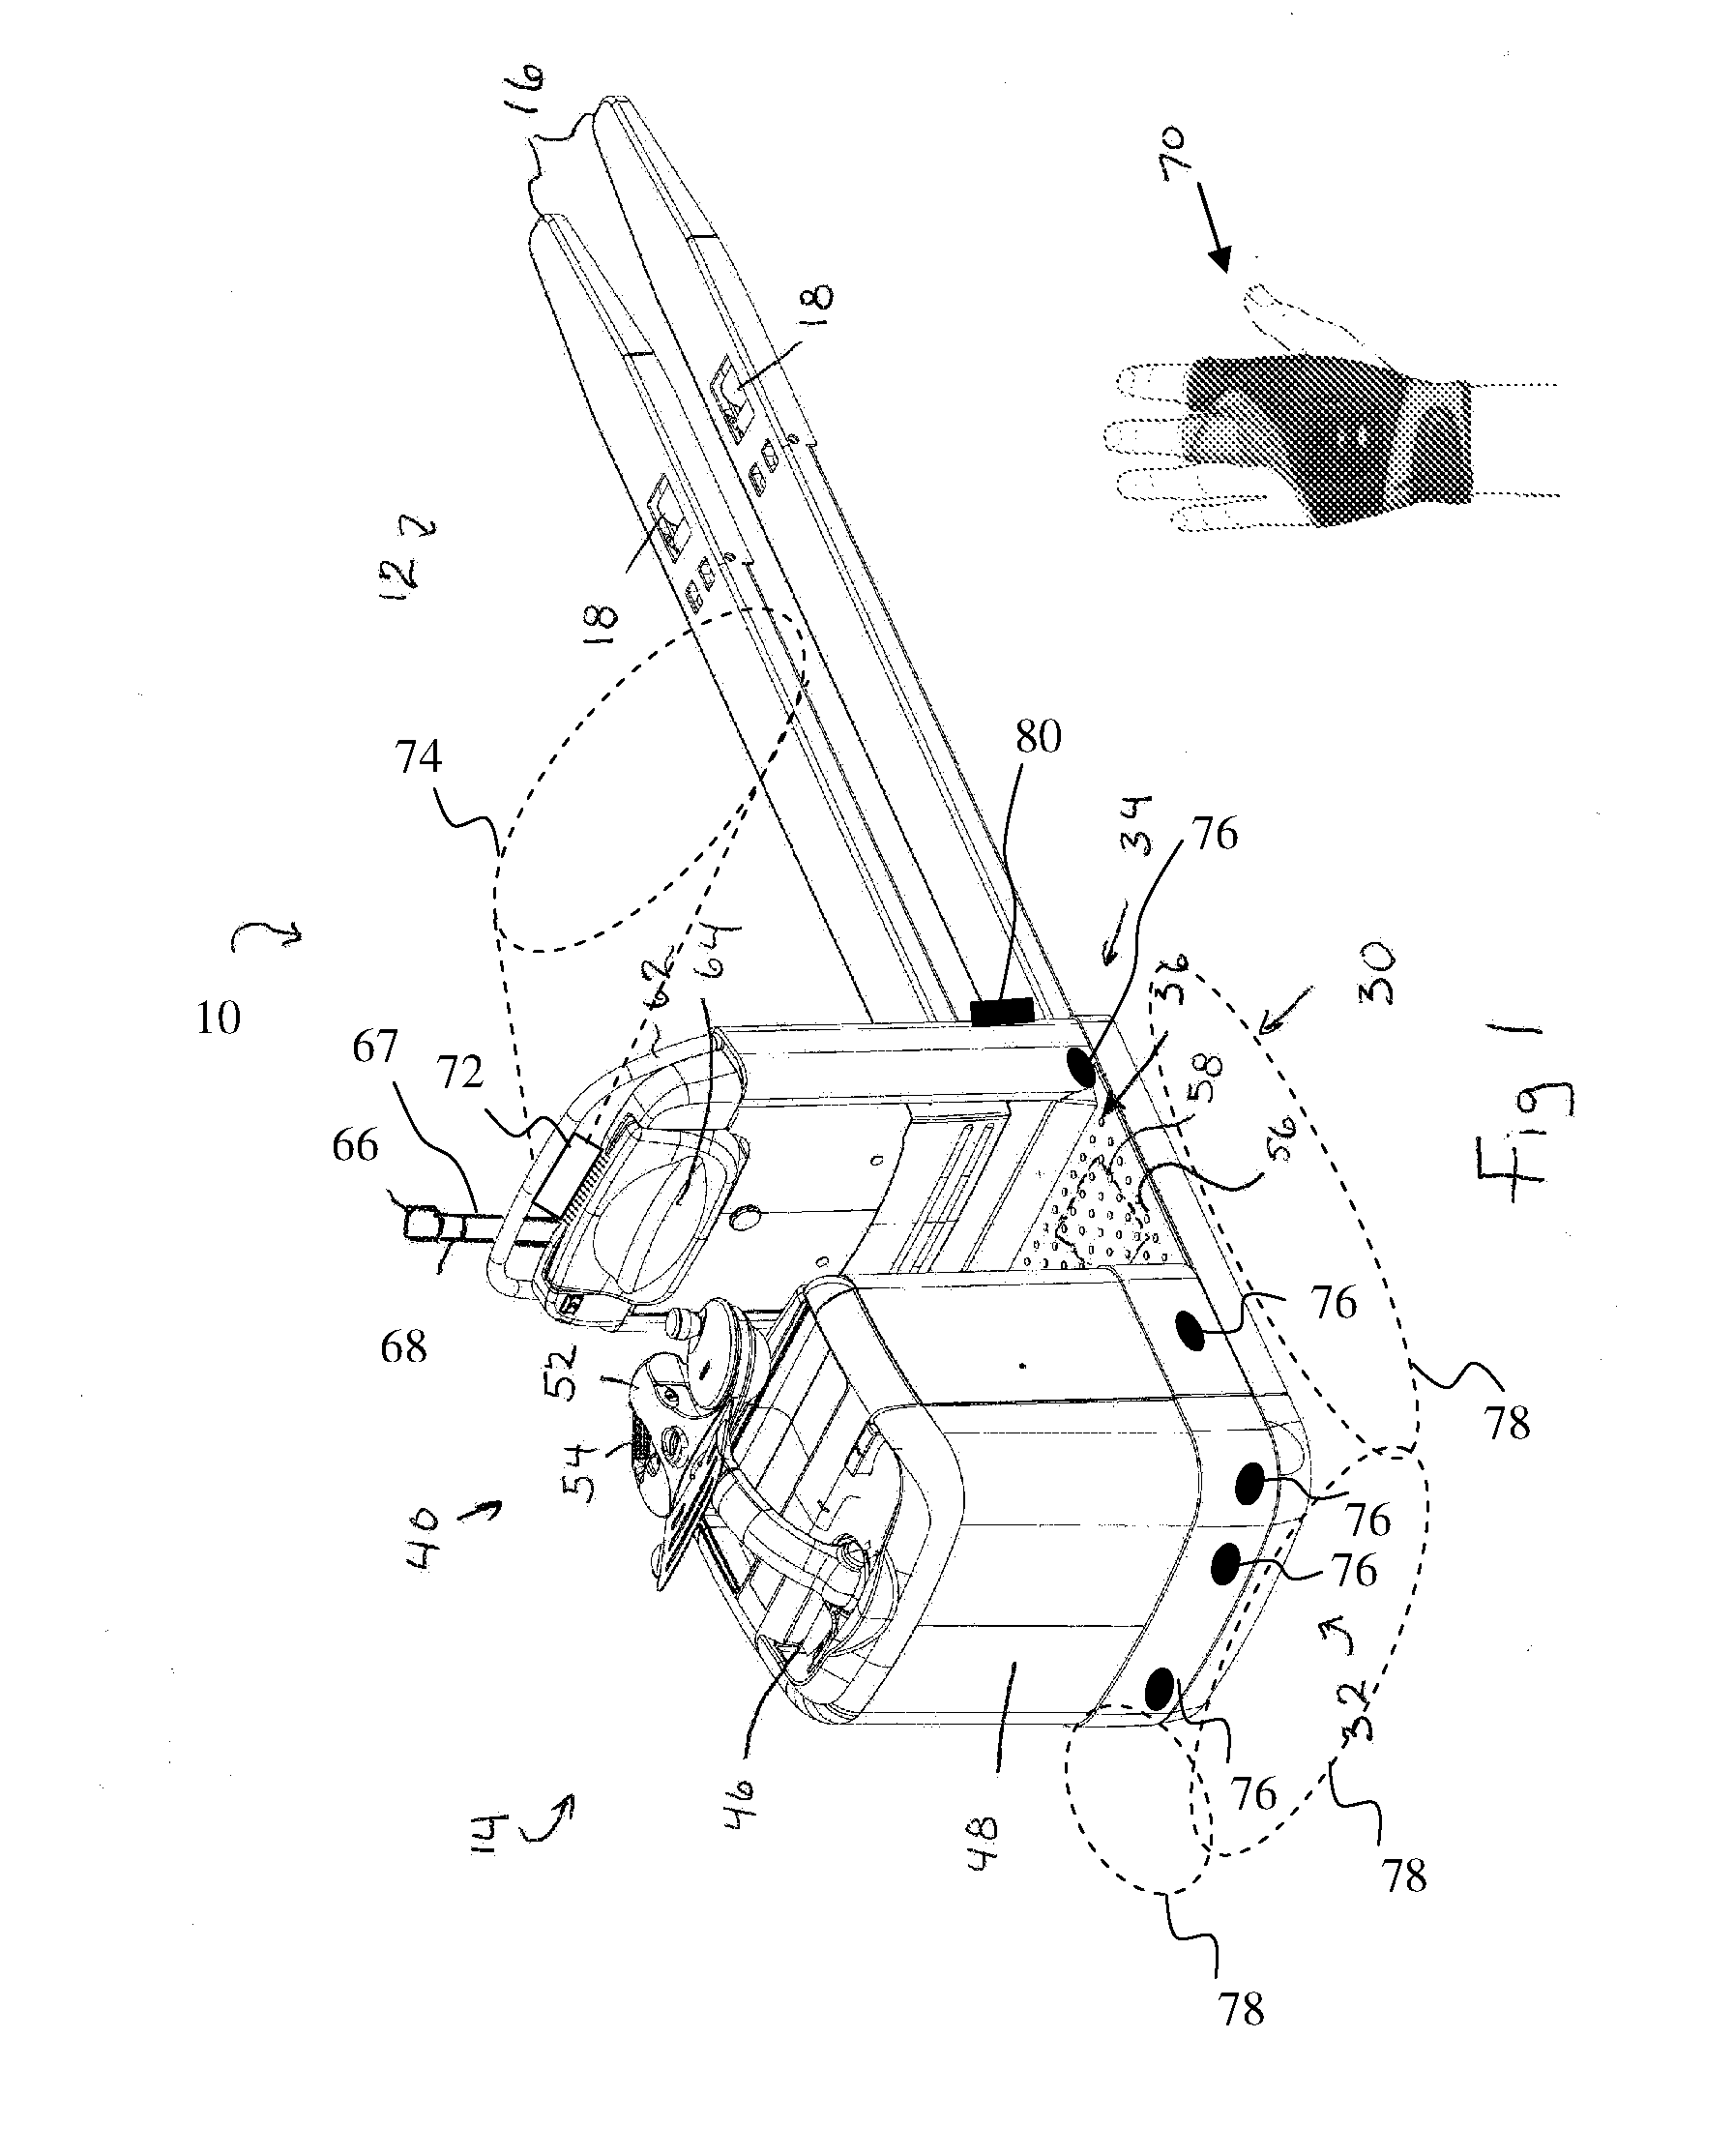 Systems and methods of remotely controlling a materials handling vehicle